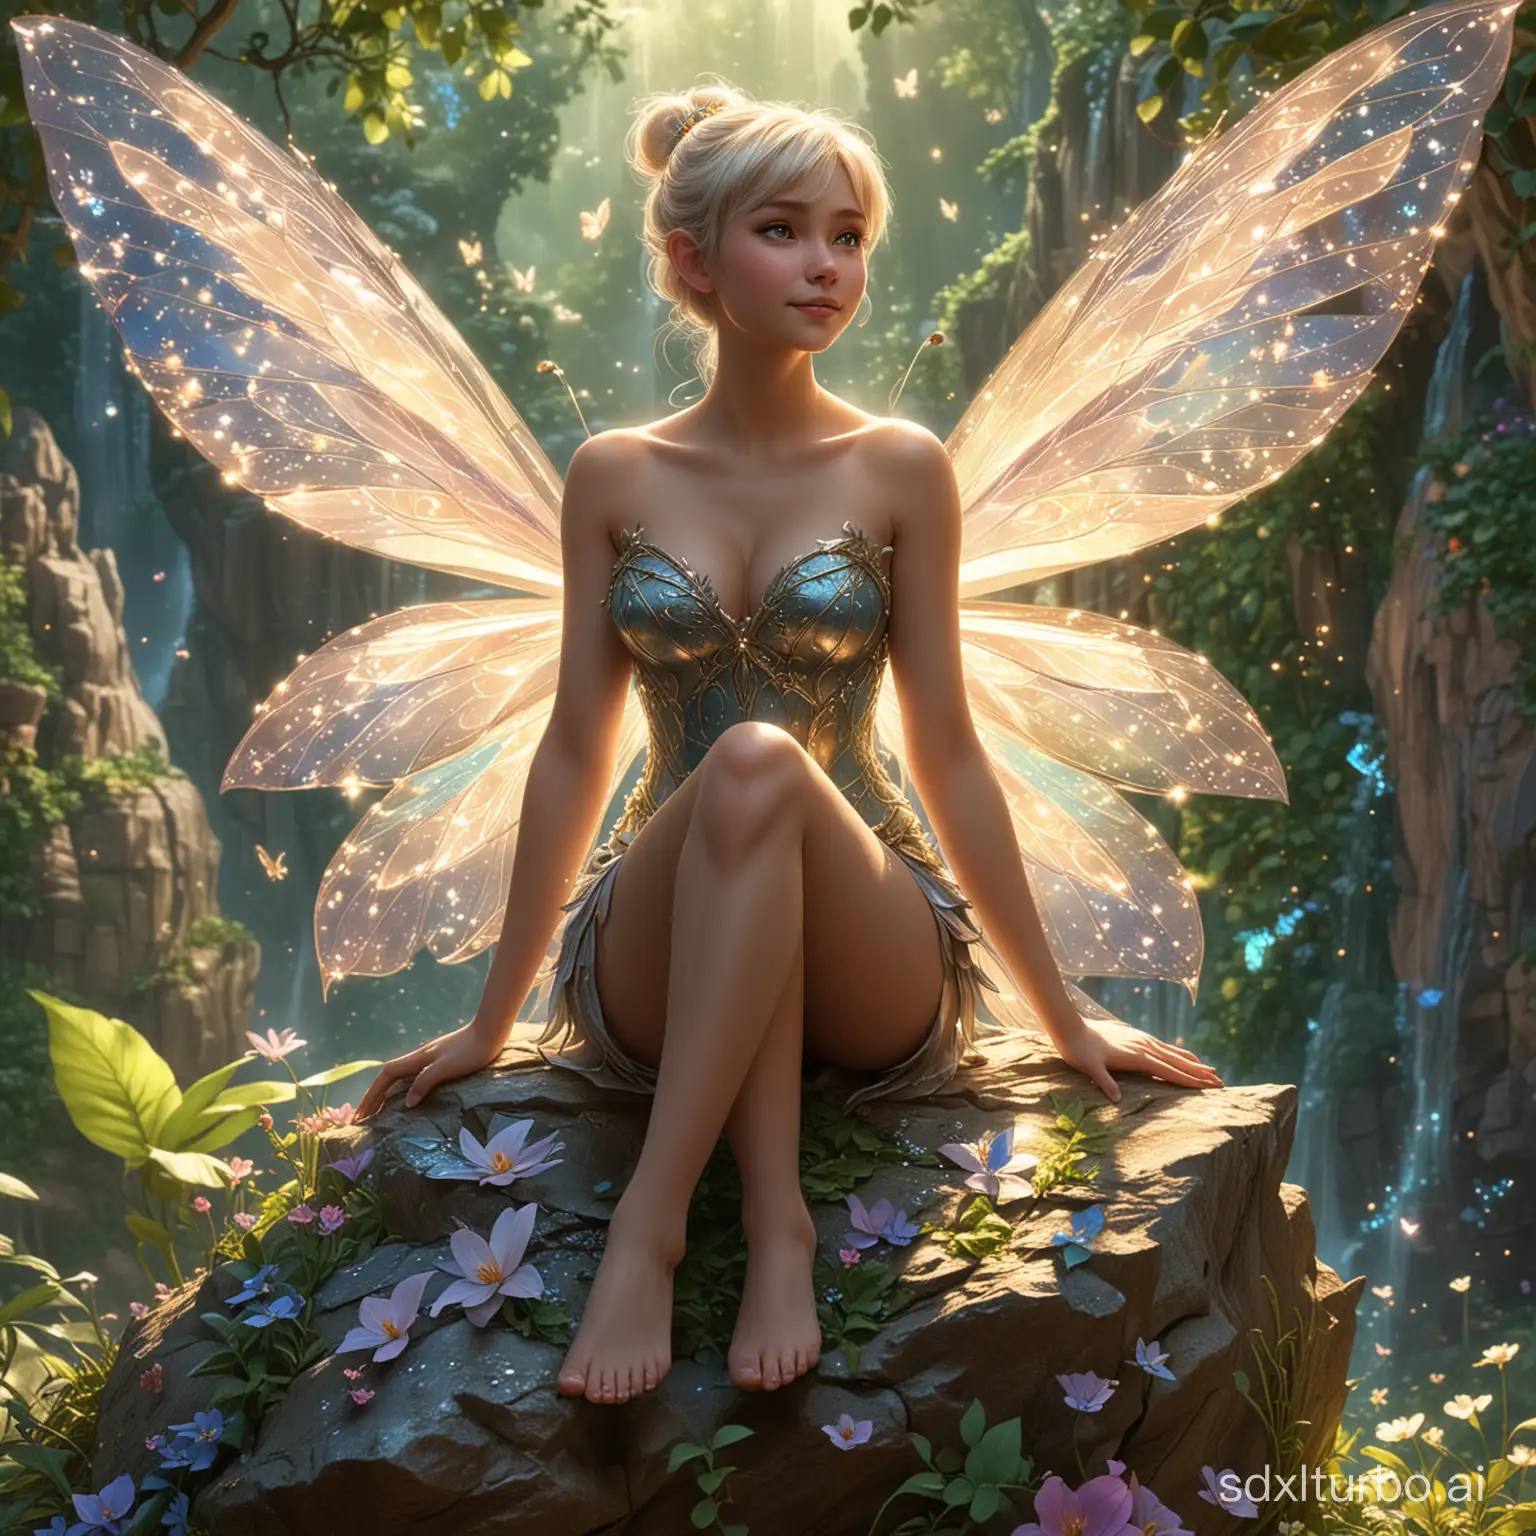 Enchanting-Pixie-with-Intricate-Wings-DisneyInspired-Artwork-Featuring-a-Glowing-NonBinary-Fairy